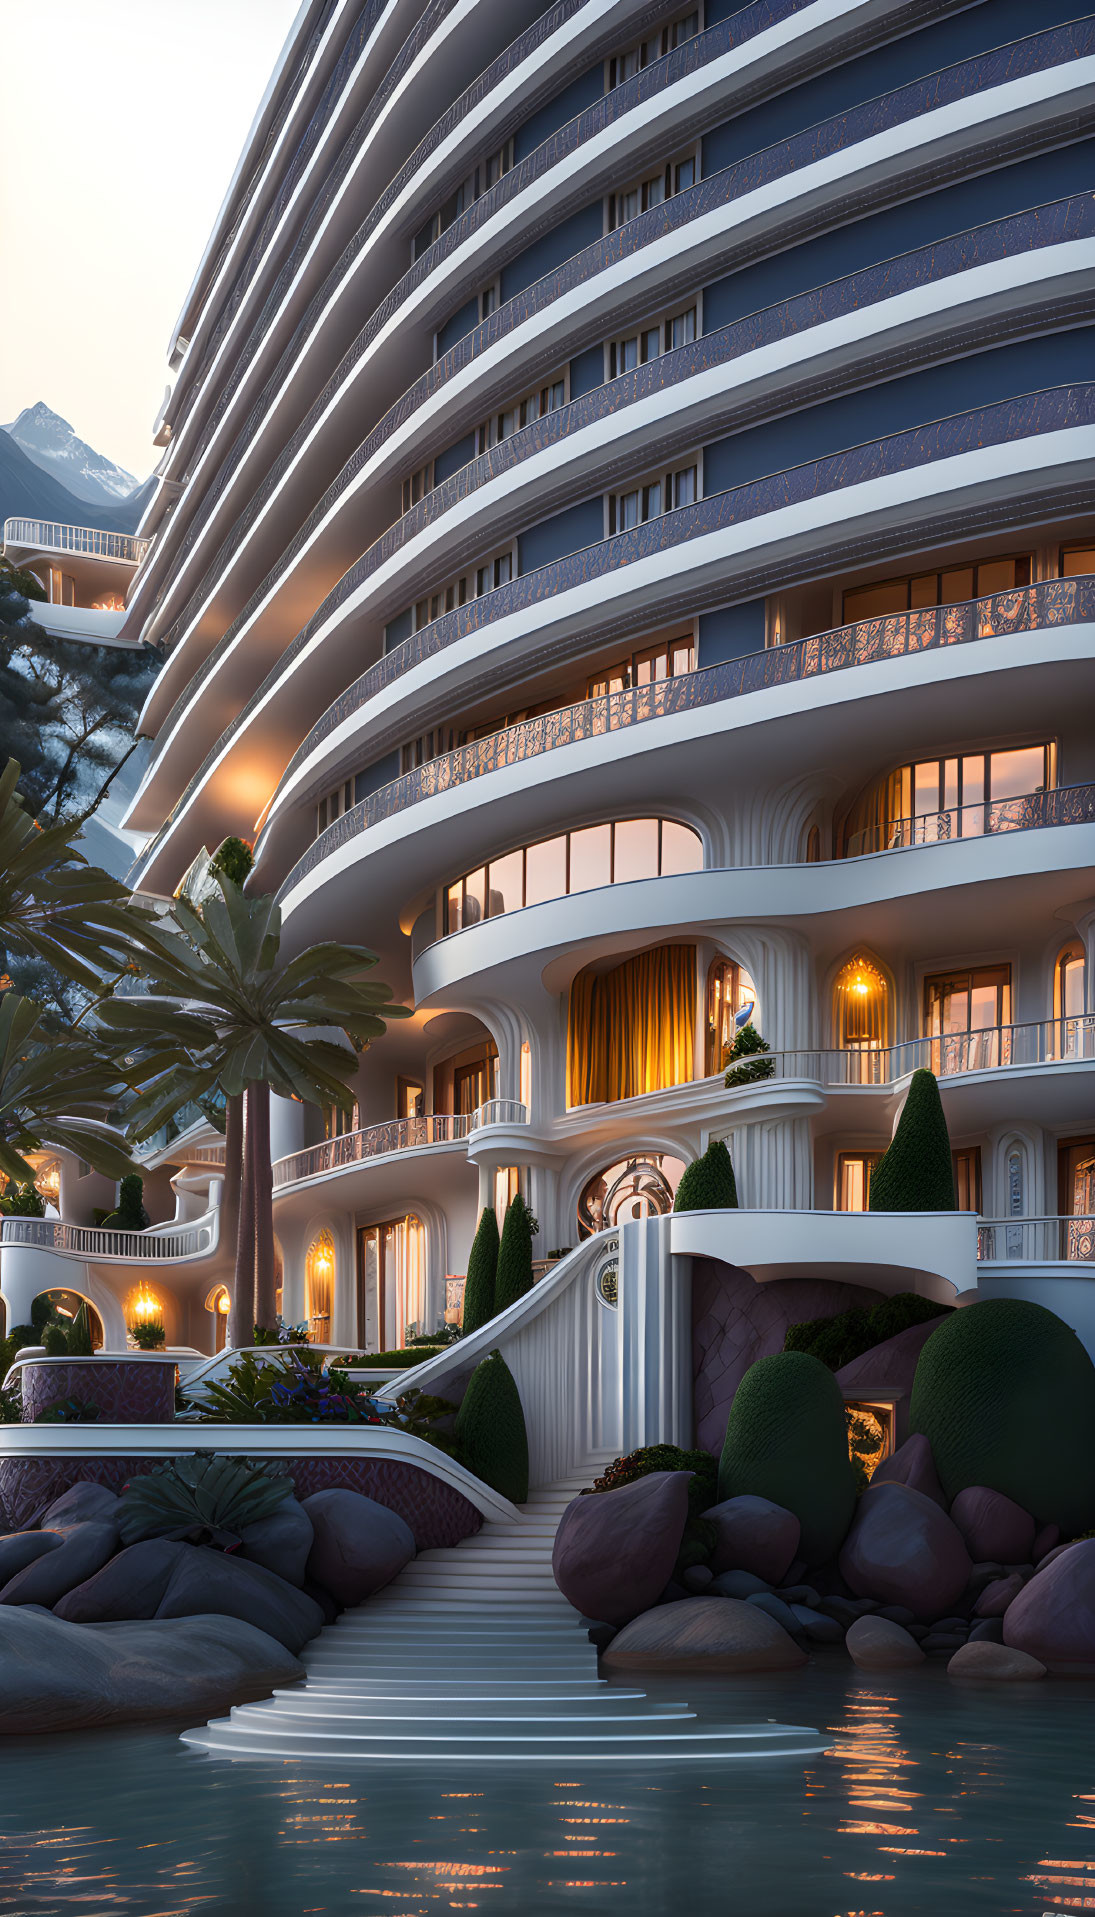 Curved Balconies Hotel Illuminated at Dusk surrounded by Palm Trees and Water